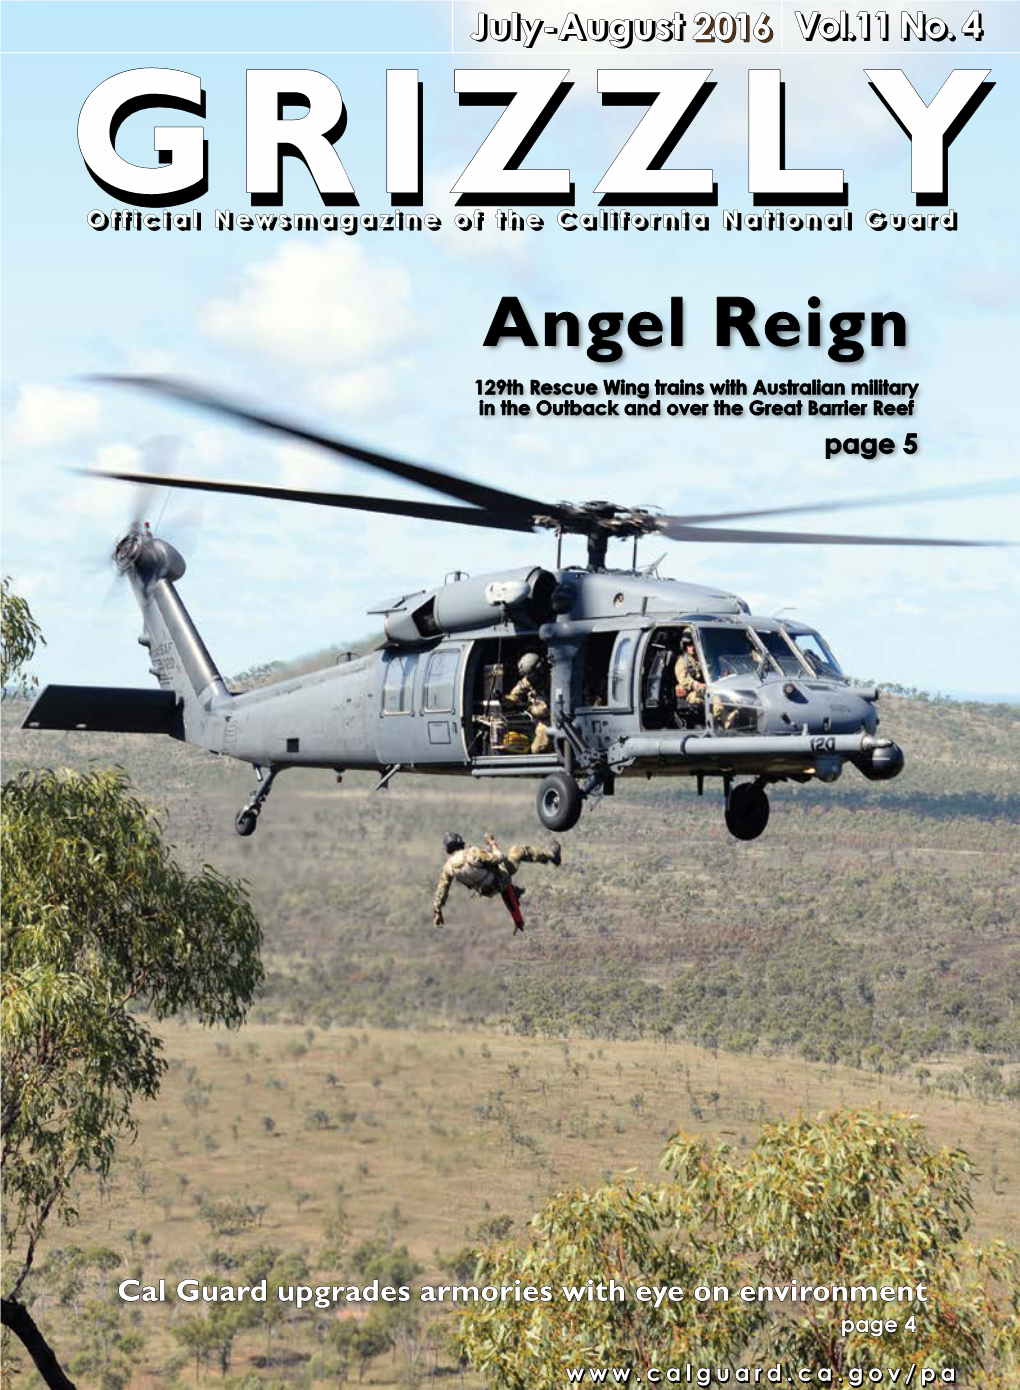 Angel Reign 129Th Rescue Wing Trains with Australian Military in the Outback and Over the Great Barrier Reef Page 5